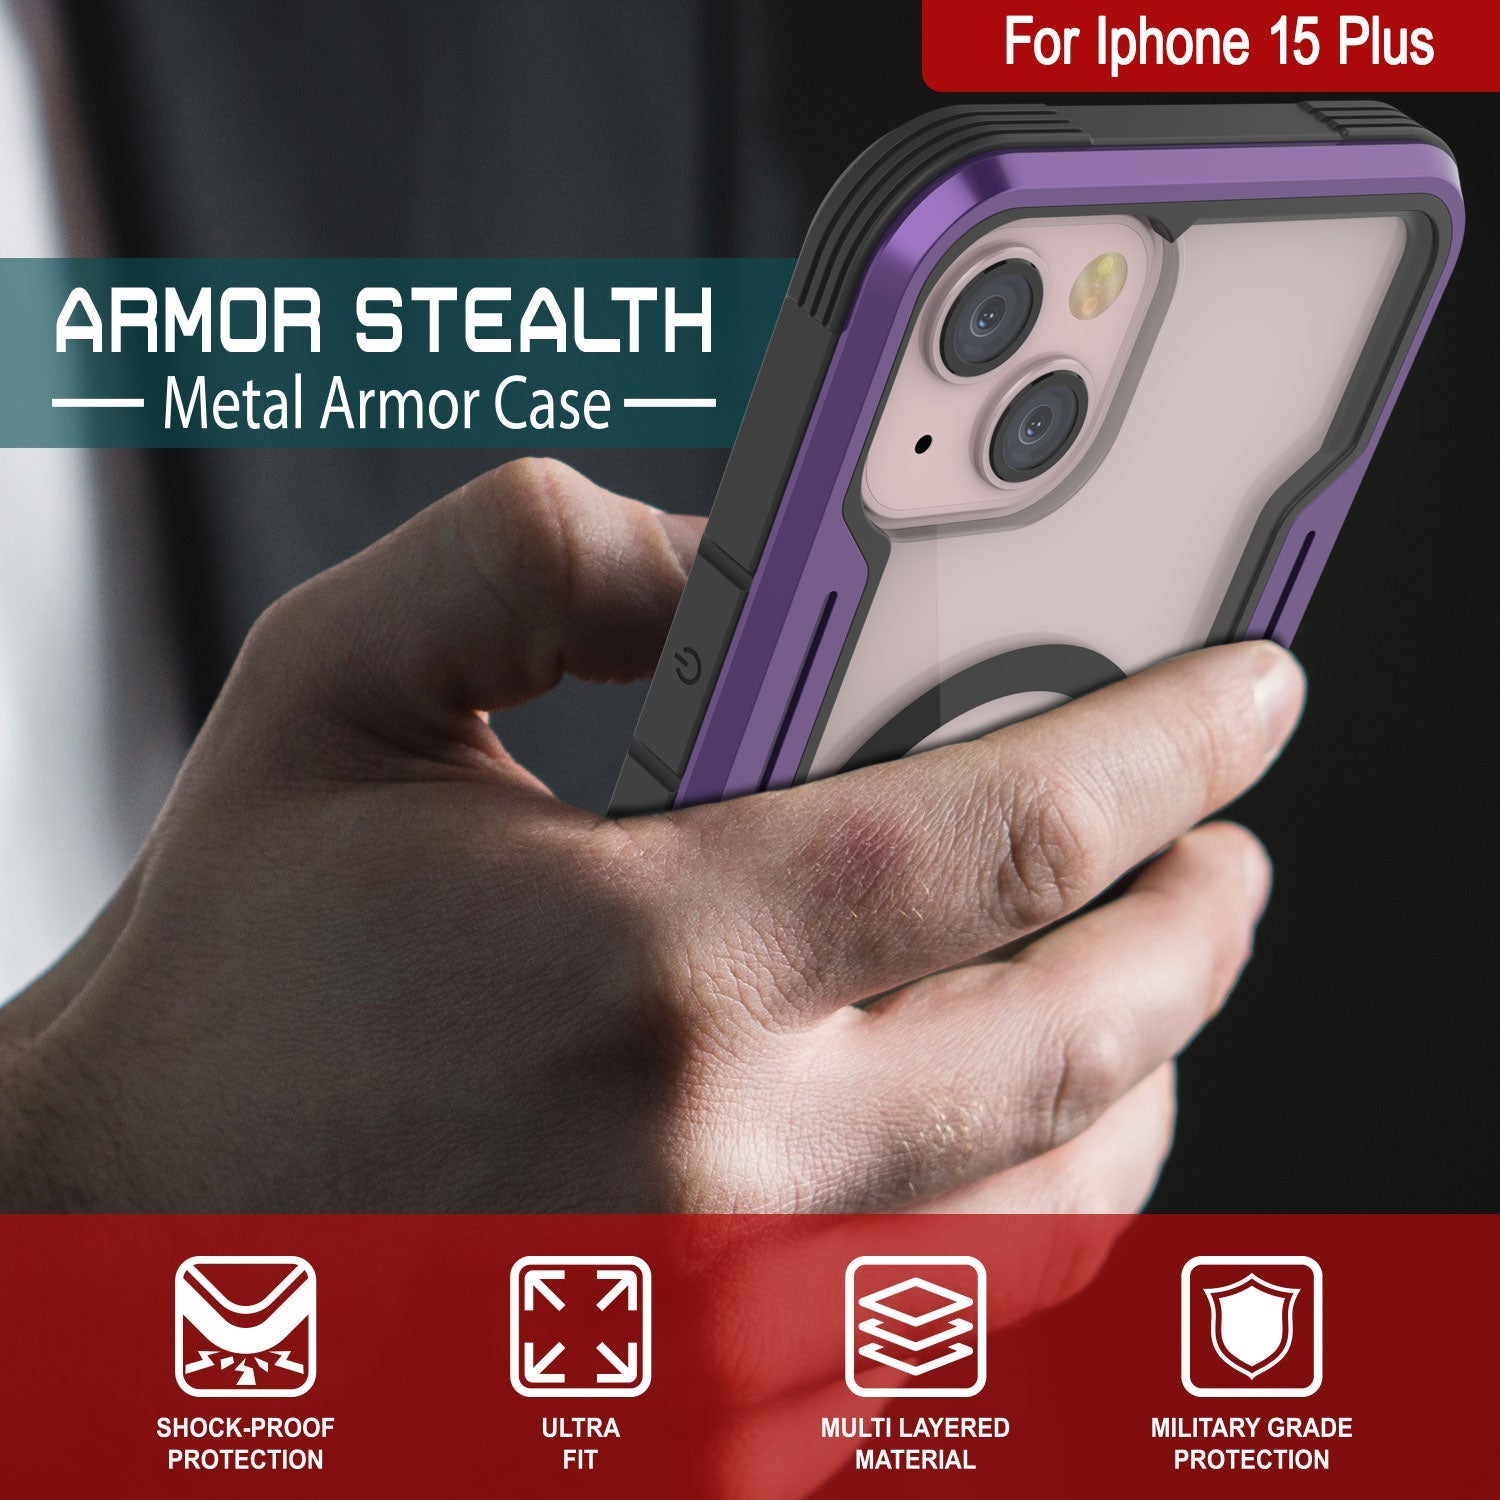 Punkcase iPhone 15 Plus Armor Stealth MAG Defense Case Protective Military Grade Multilayer Cover [Purple]